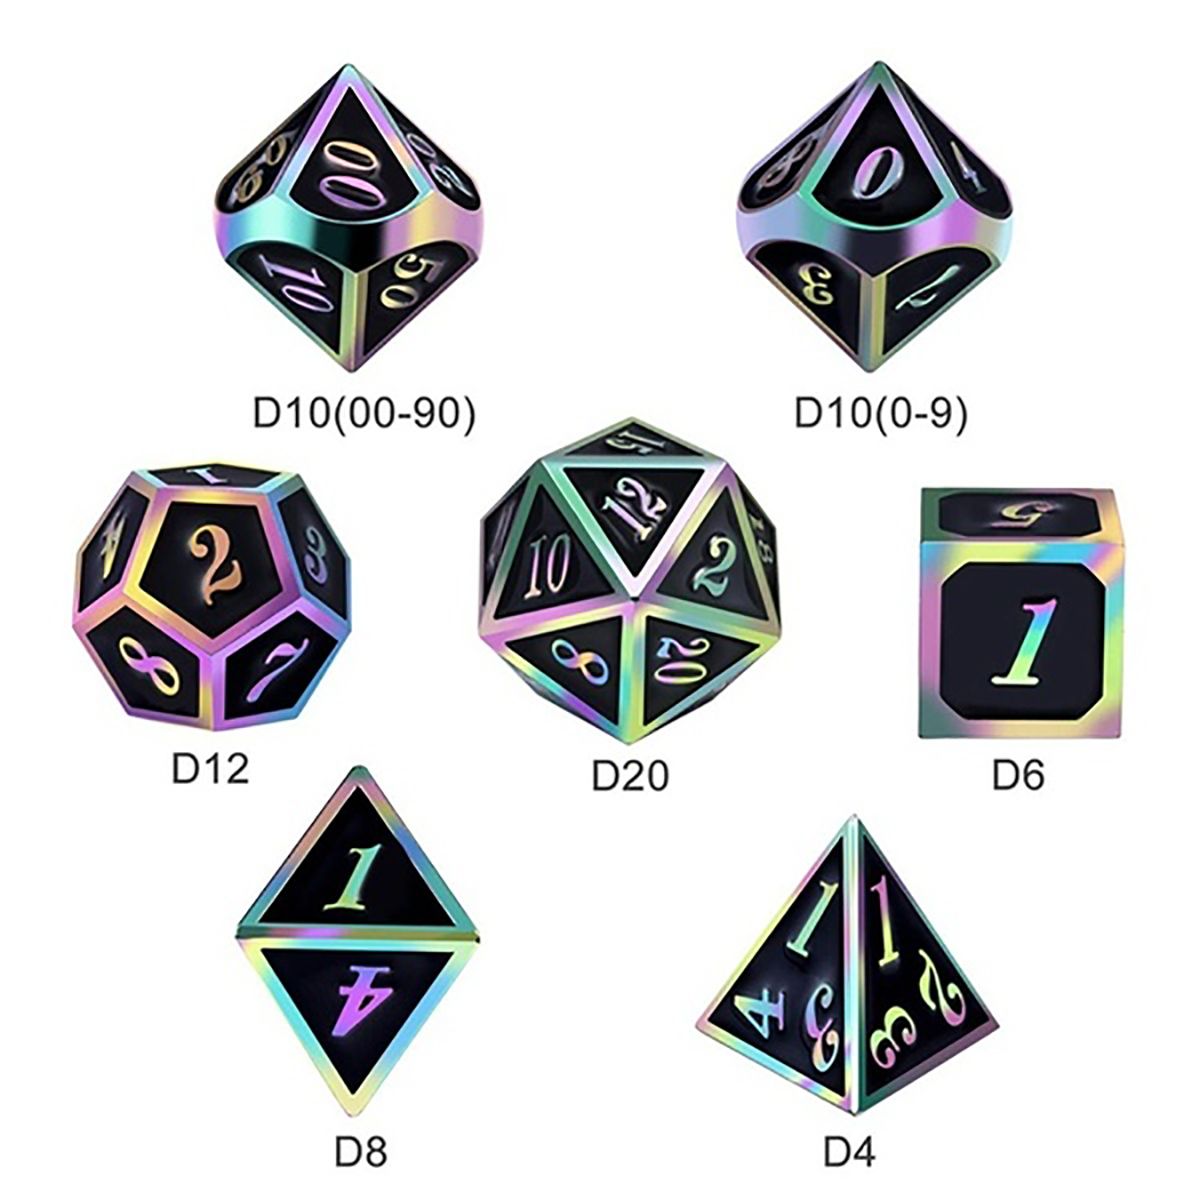 7-PcsSet-Alloy-Metal-Dice-Set-Playing-Game-Poker-Card-Dungeons-Dragons-Party-Board-Game-Toy-1568223